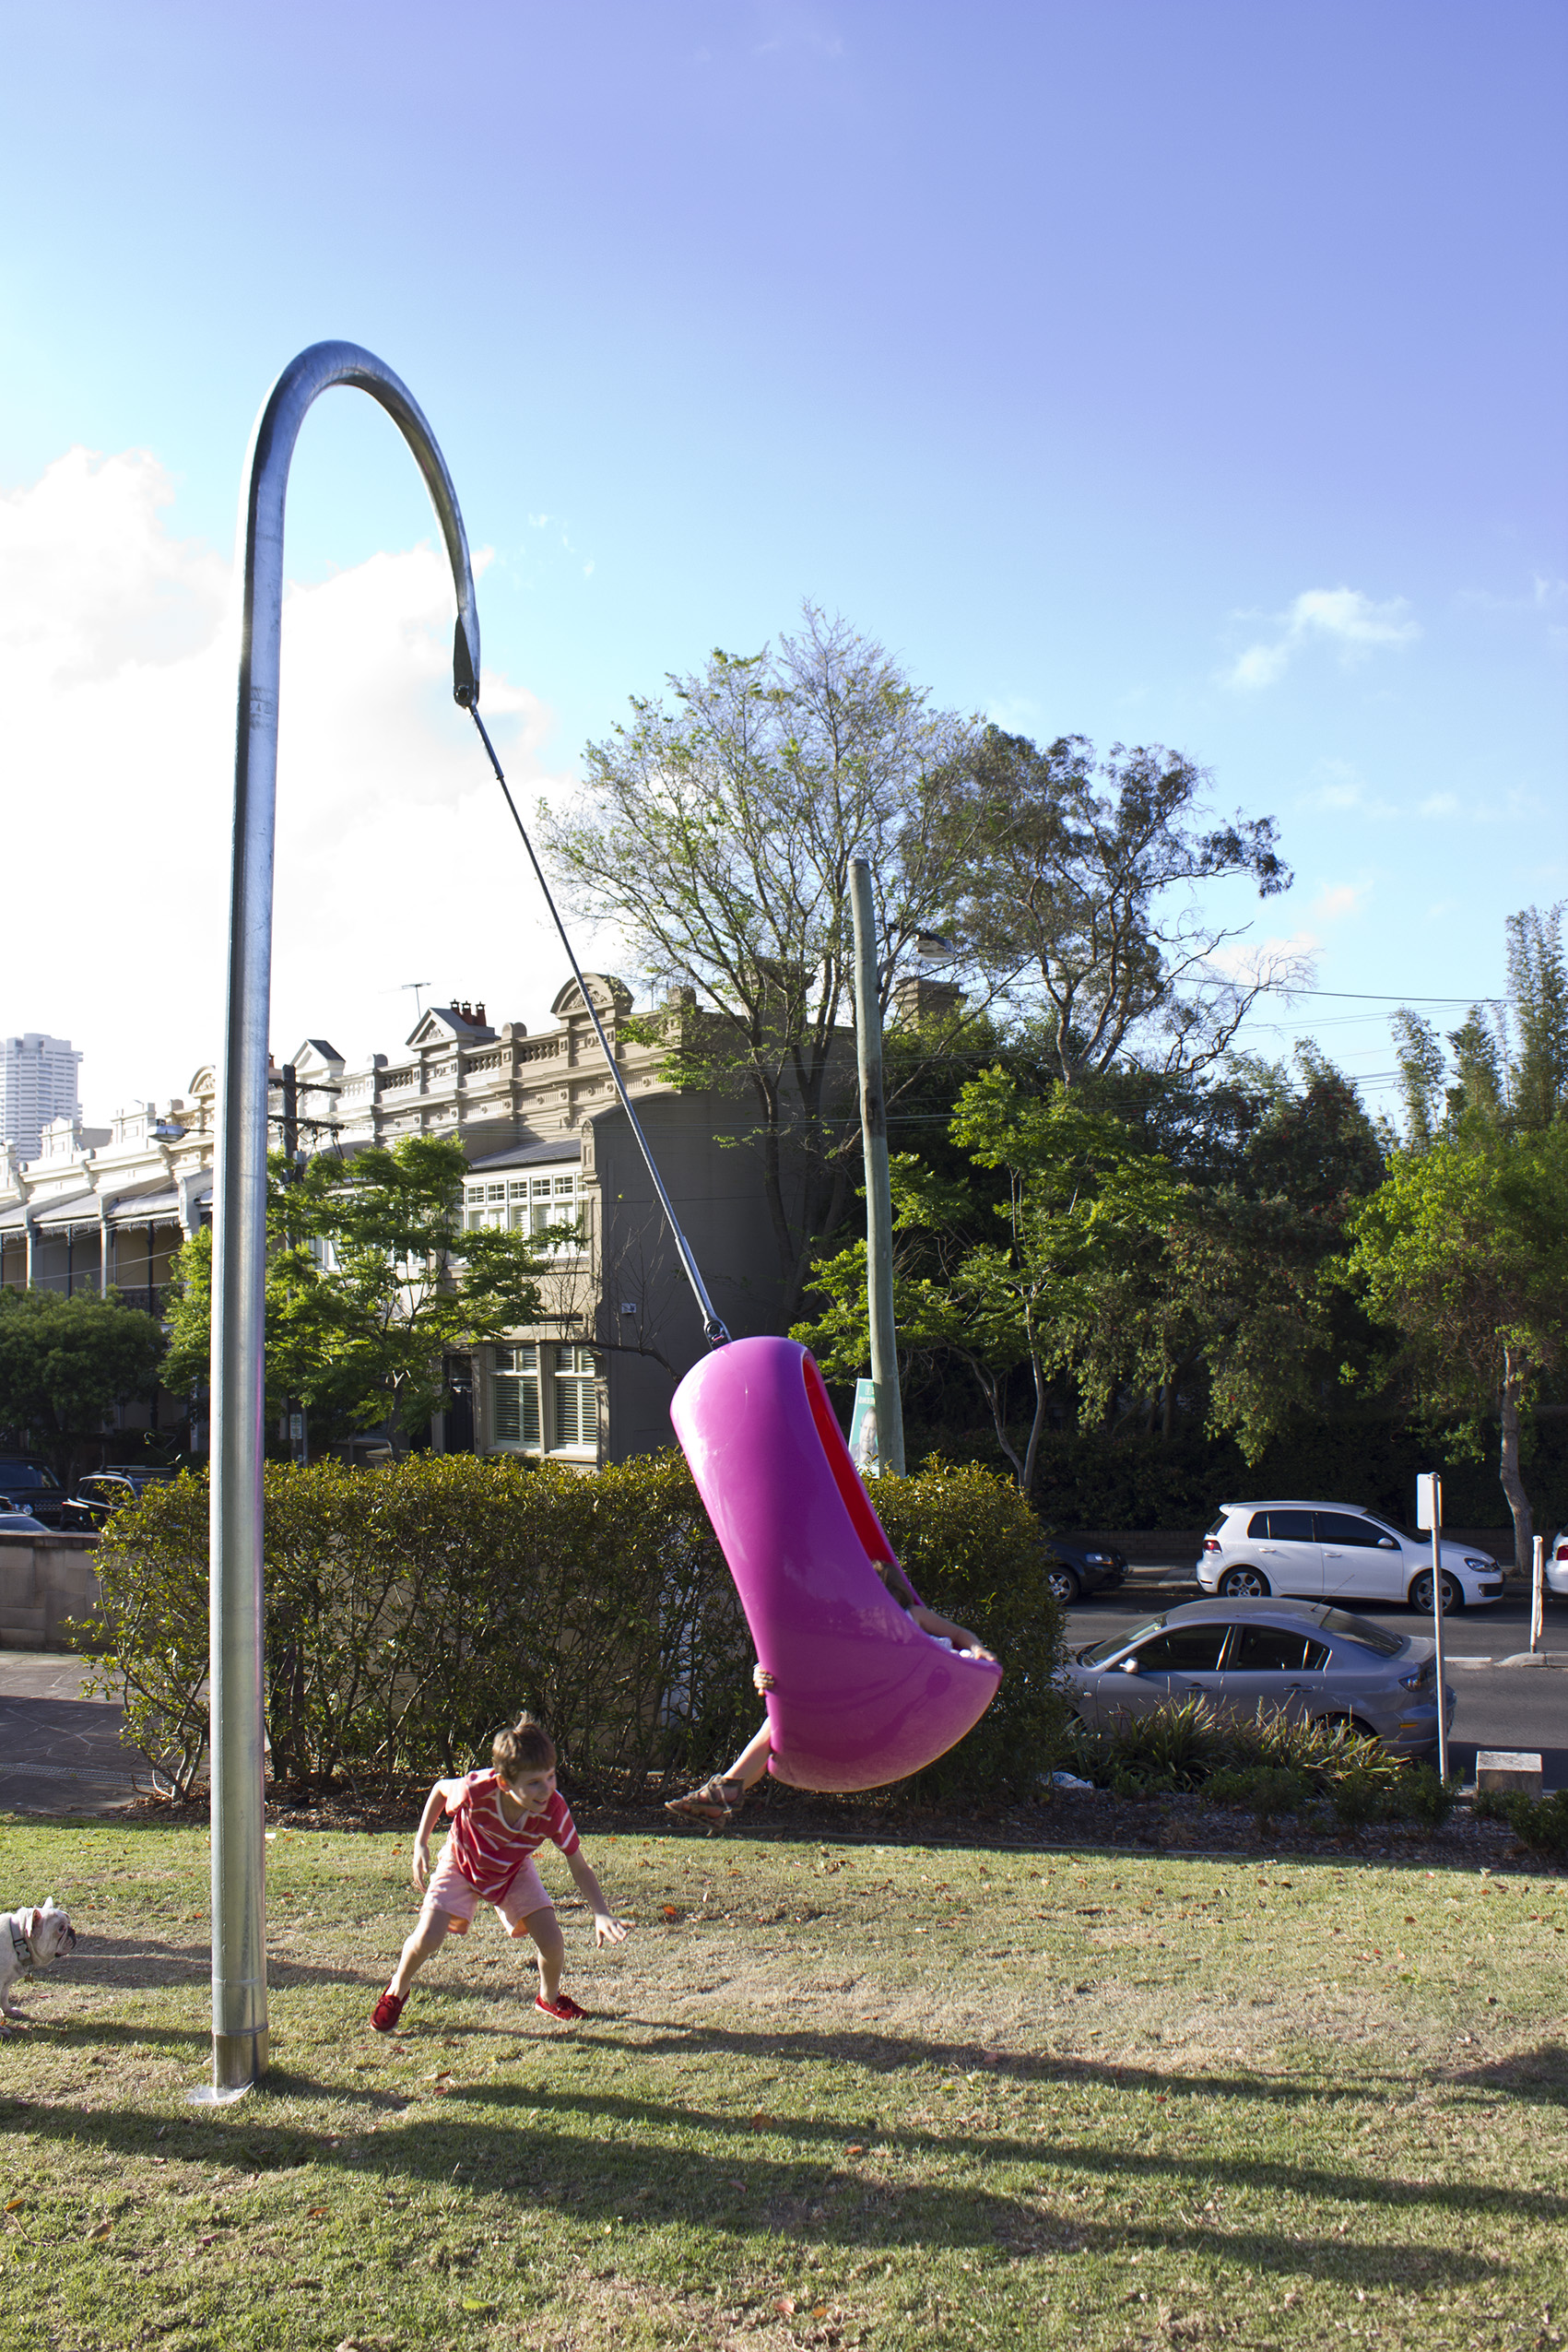 Mikala Dwyer, Egg Swing, 2012, Royal Hospital for Women Park, Paddington (Commissioned by Woollahra Council), Sydney